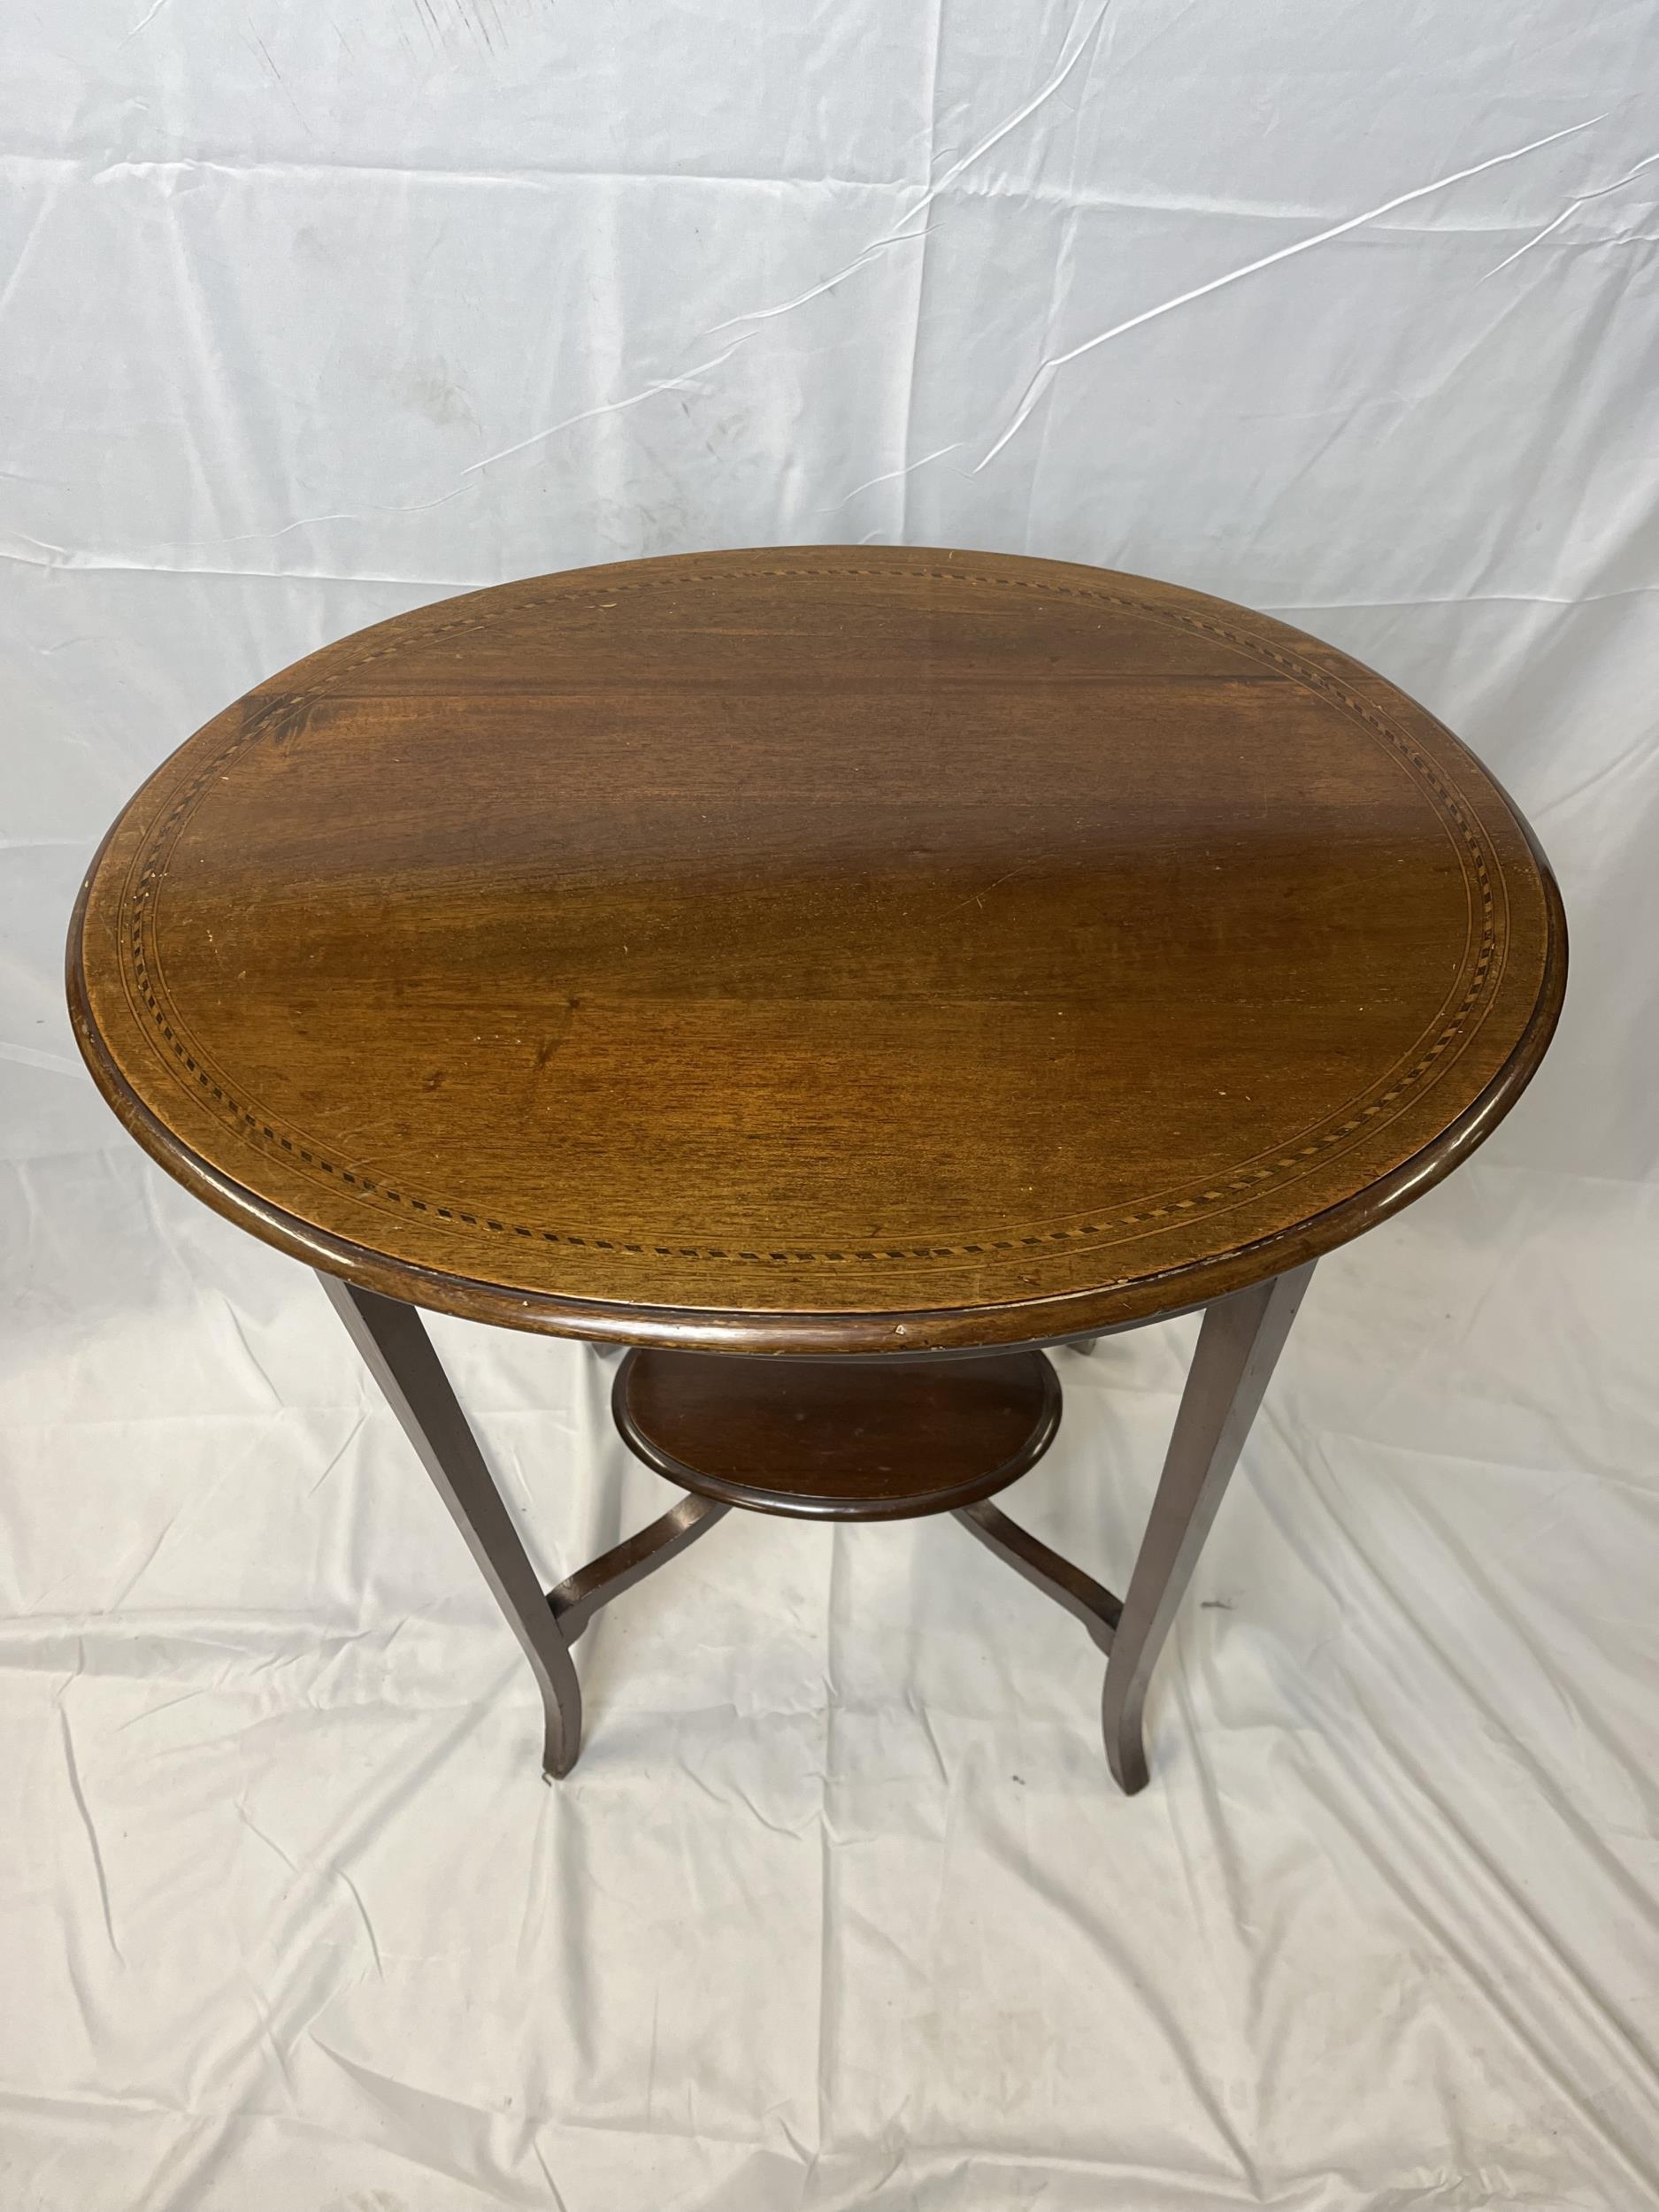 Lamp or occasional table, Edwardian mahogany and satinwood inlaid. H.71 W.62 D.45cm. - Image 2 of 4